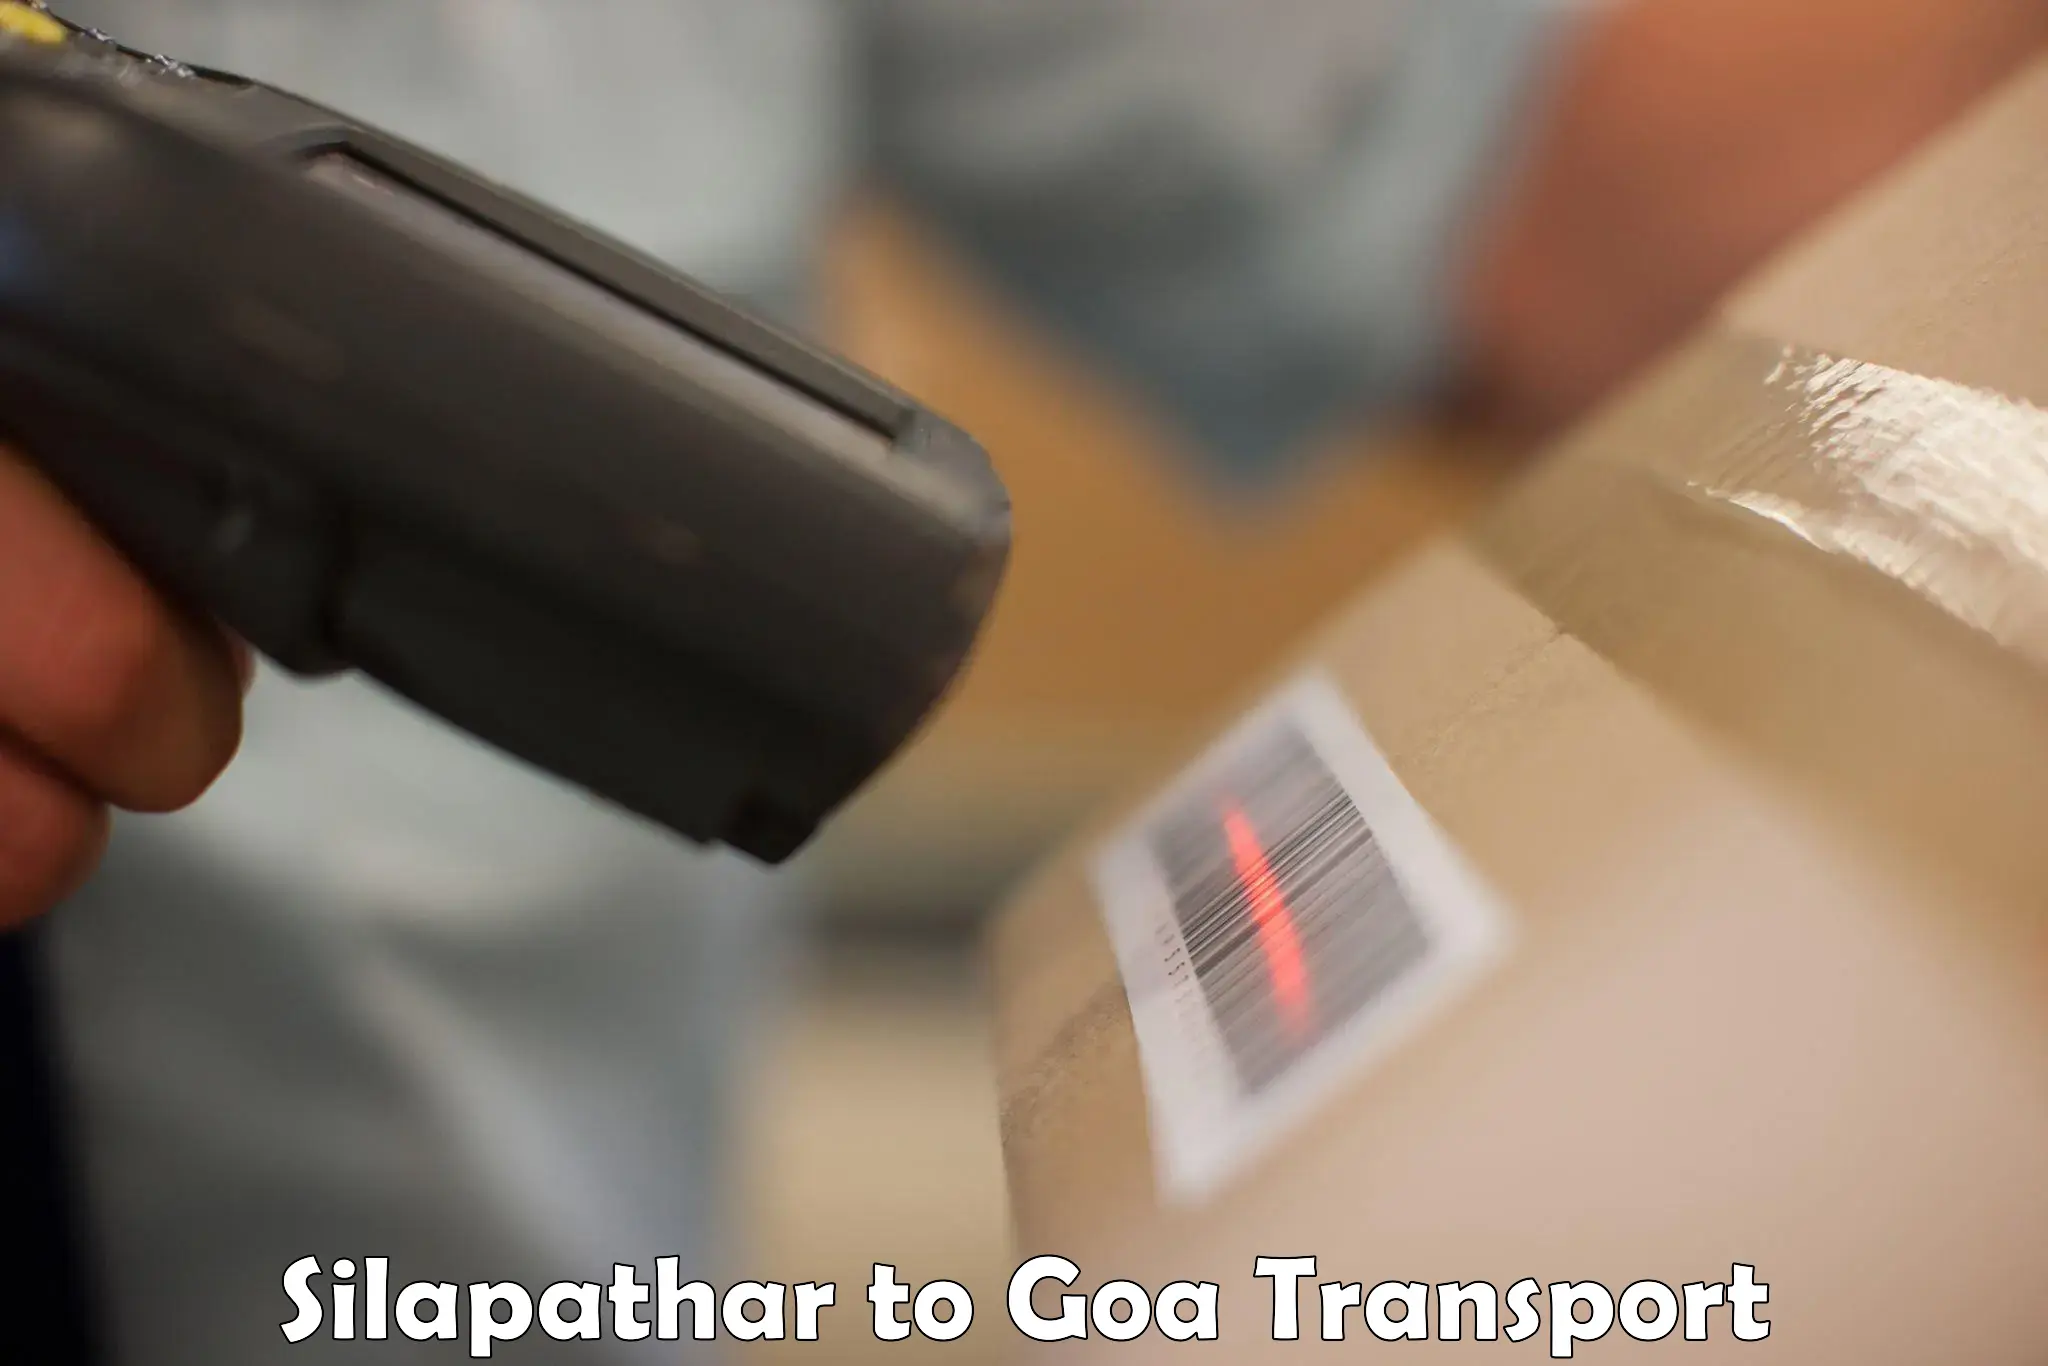 Transport shared services Silapathar to Ponda